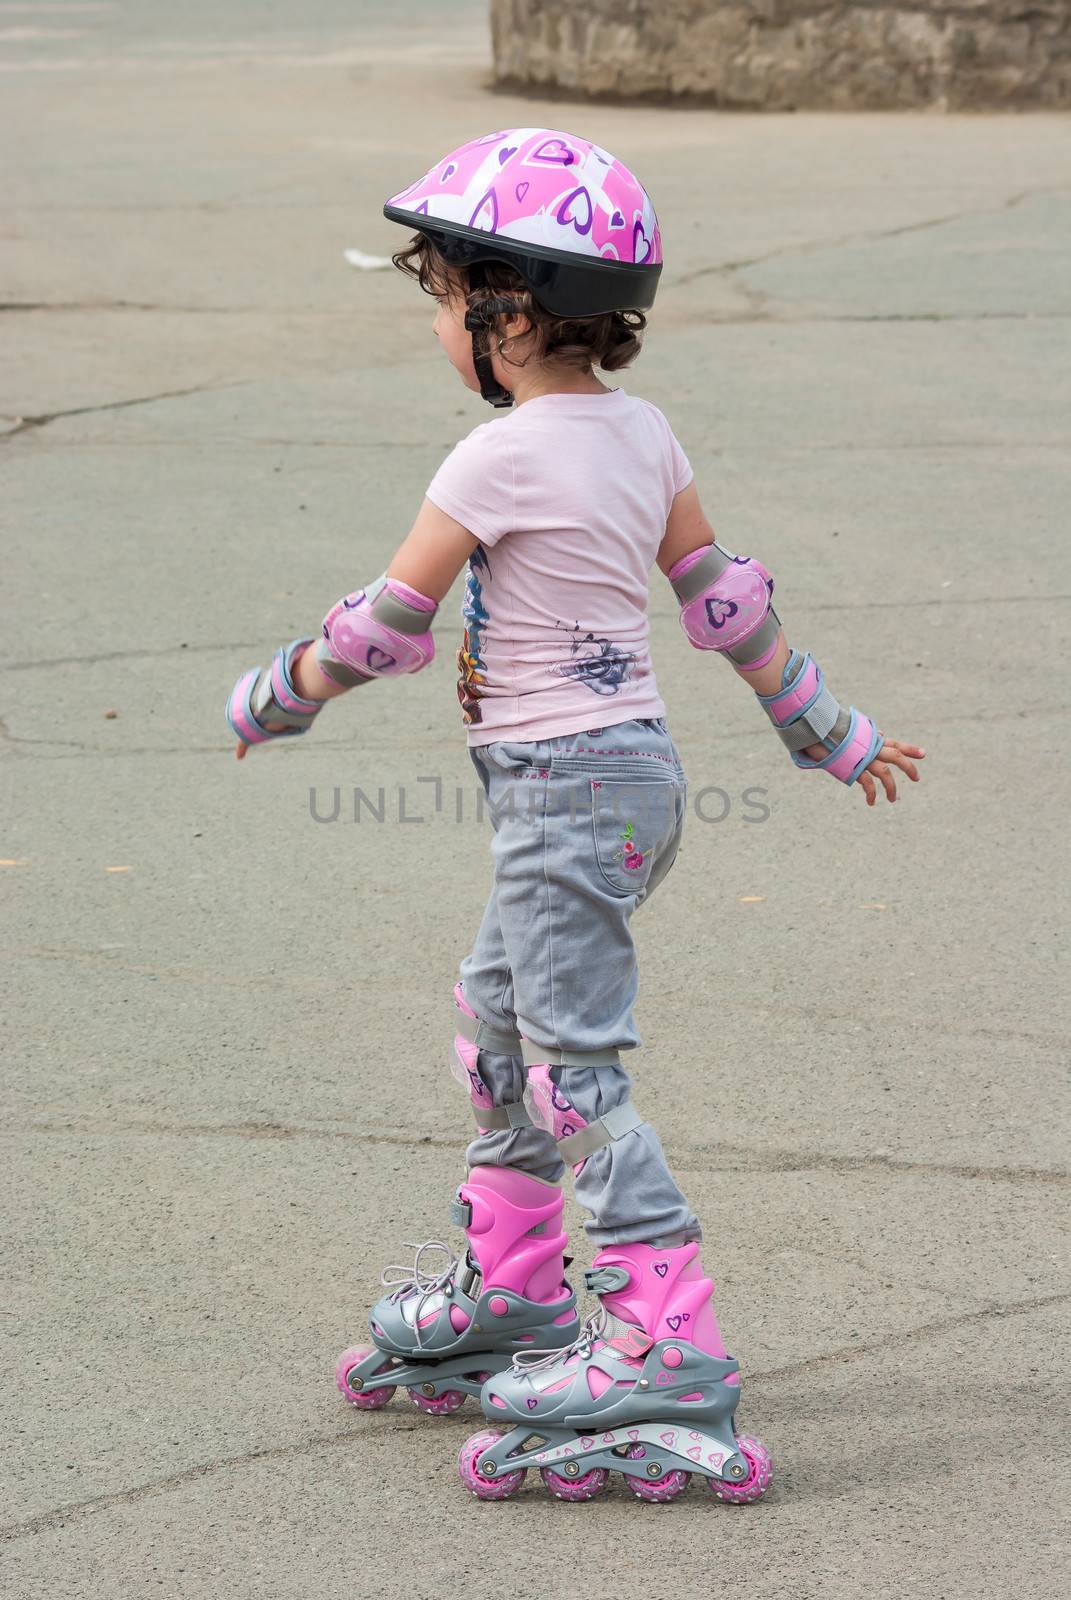 The child in the open air on roller skates